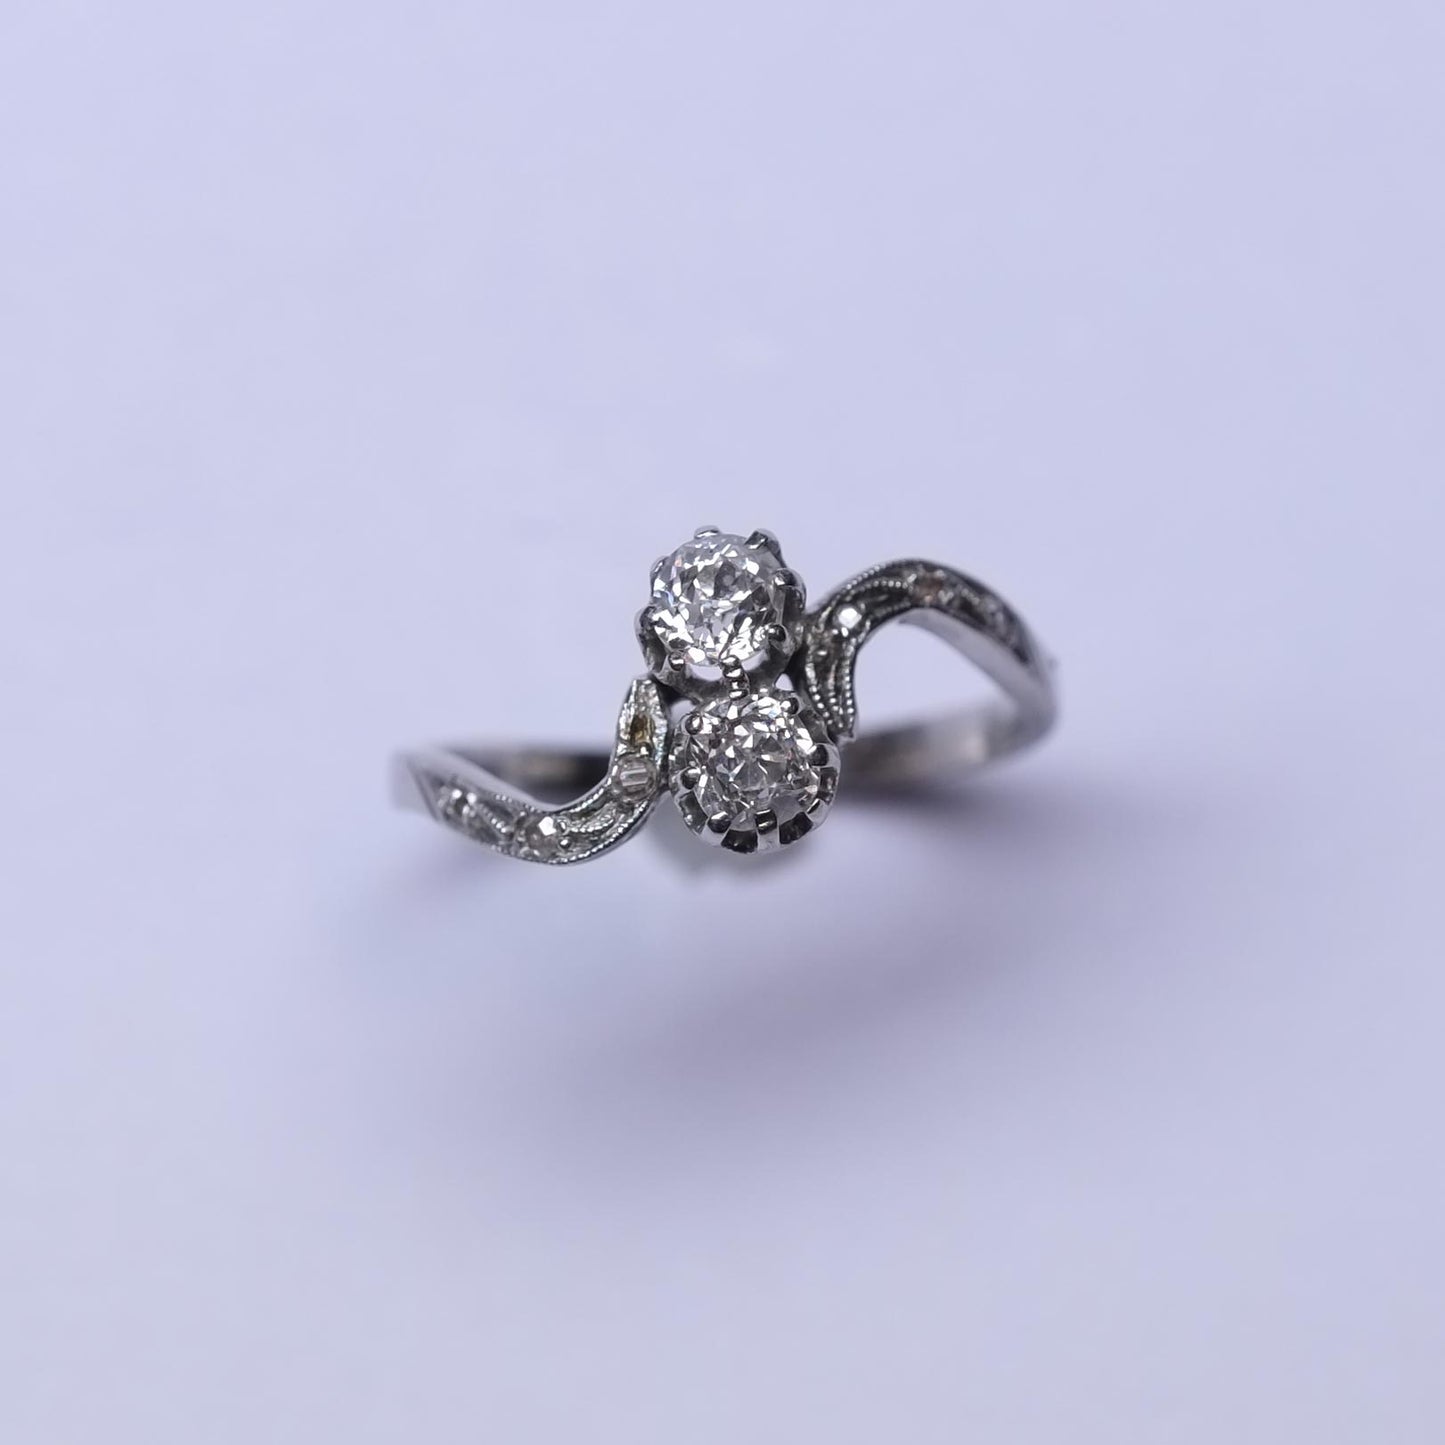 Deco Ring with Old cut Diamonds